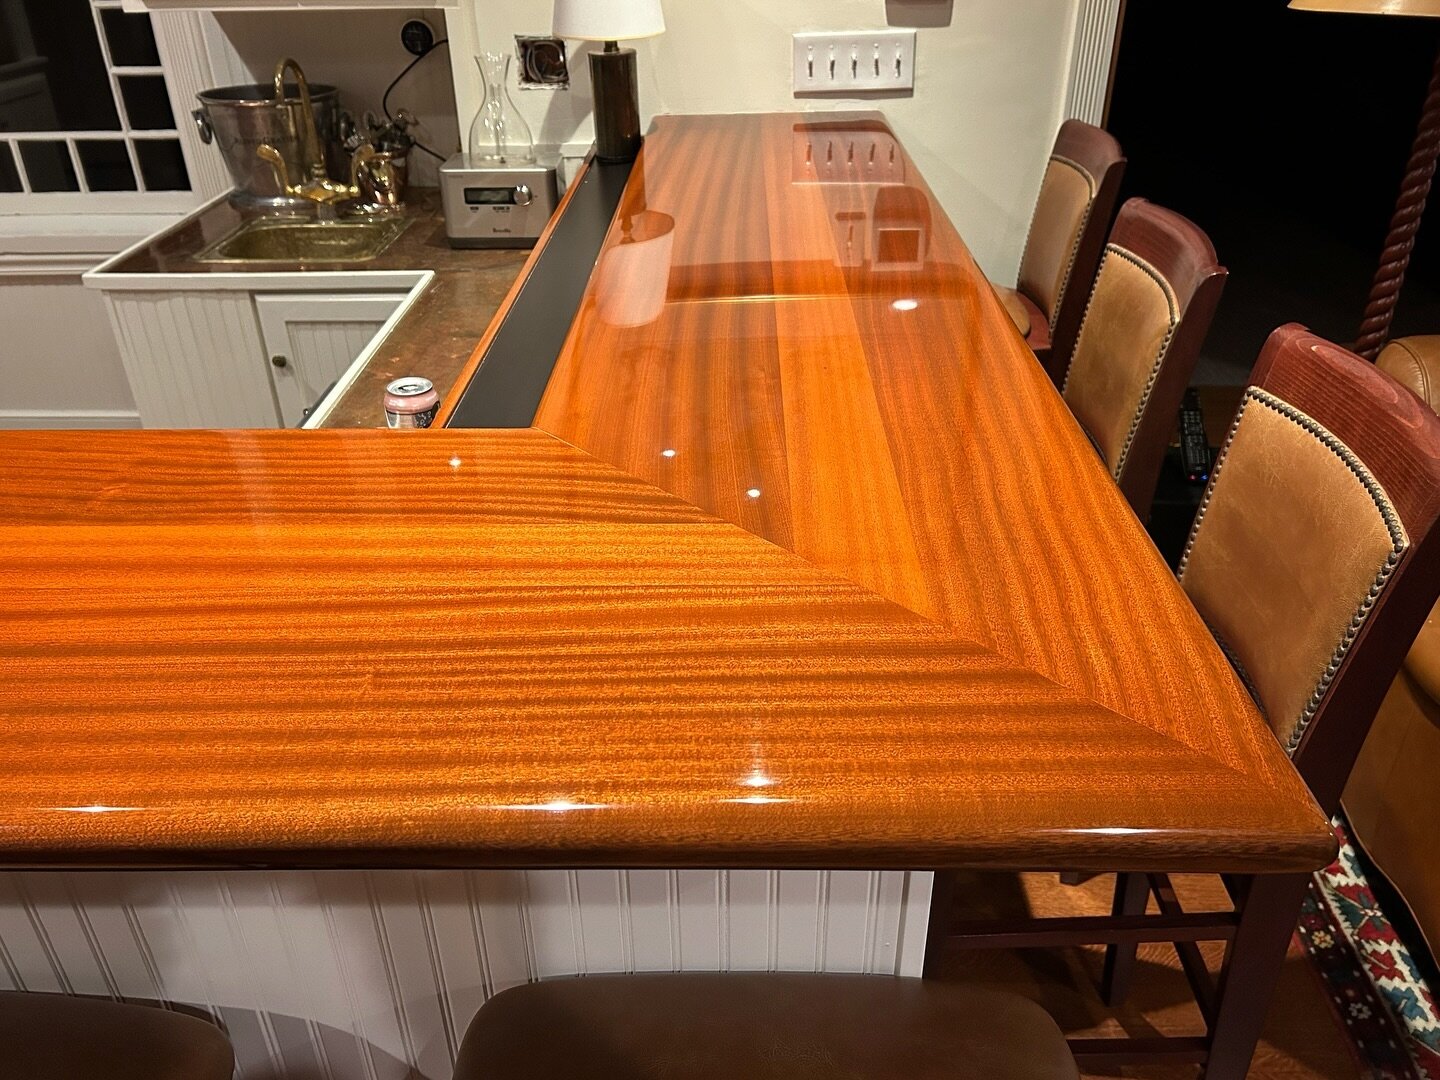 Long time no post! 

We&rsquo;ve been carving through a lot of big winter projects over the past few months and haven&rsquo;t been staying on top of our social media game. Let&rsquo;s get back to it, shall we? 

(Pictured: mahogany bar top w/ a high-